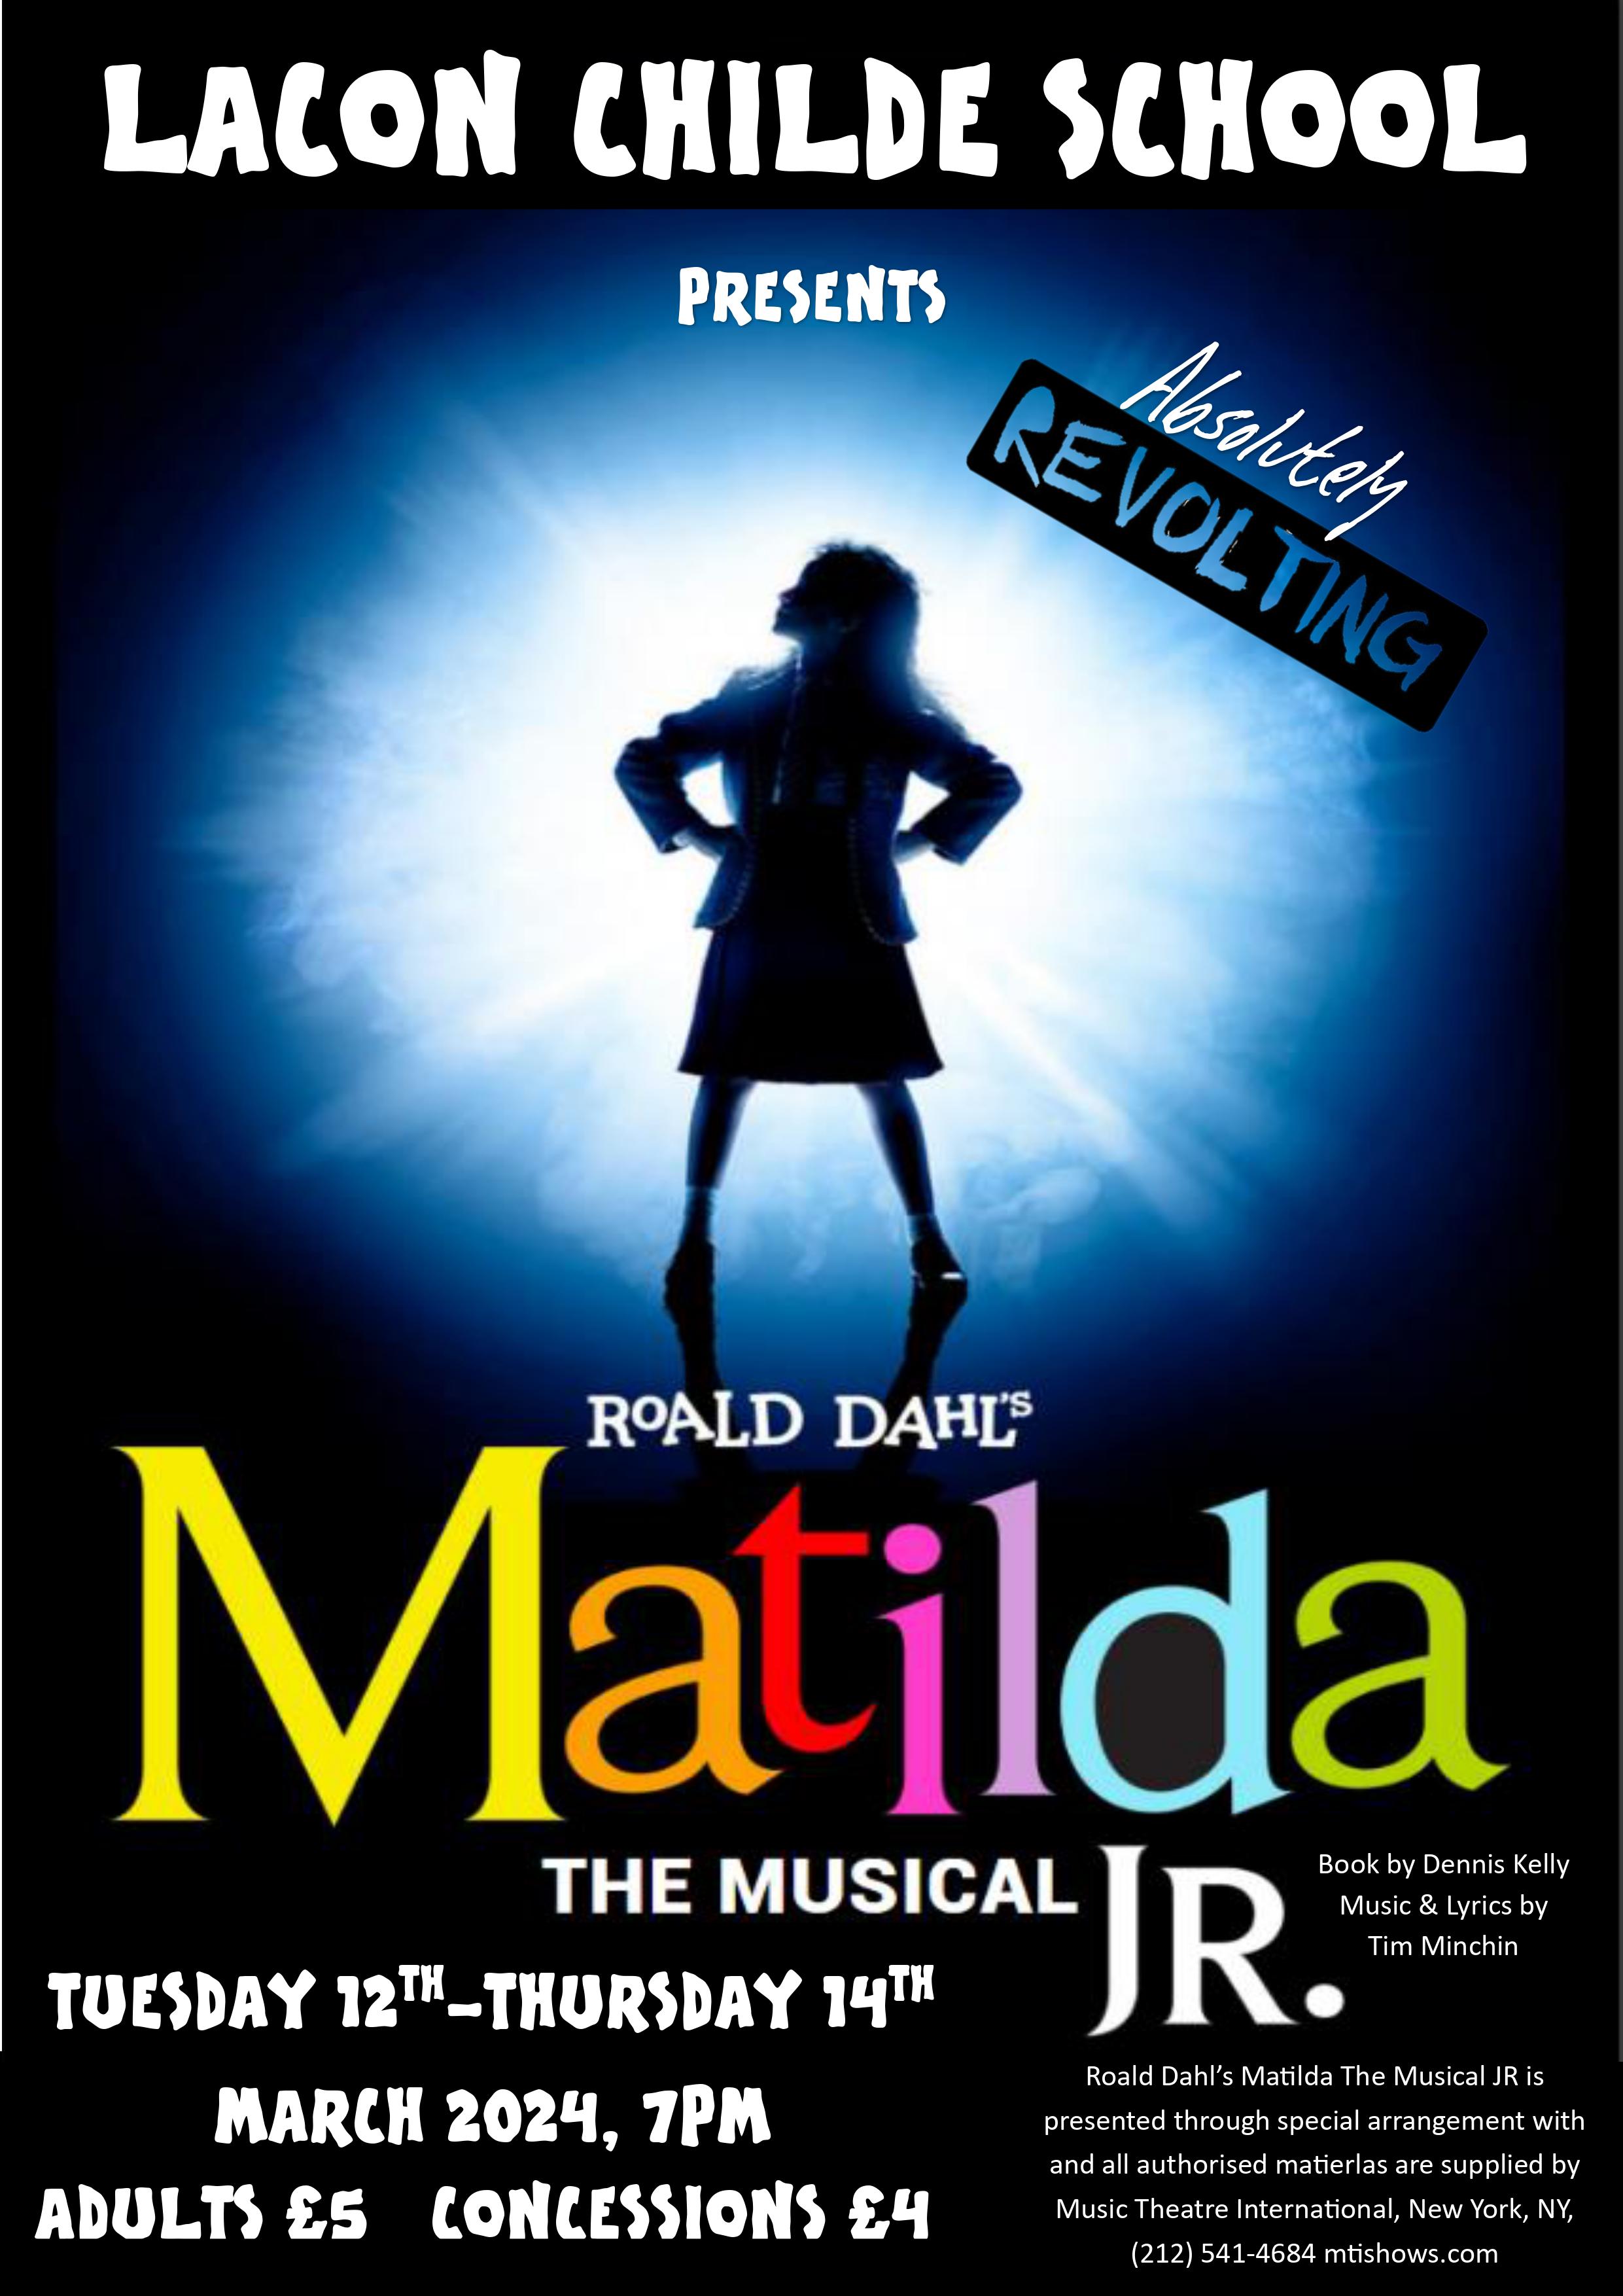 Date for Diary - Our school production of Matilda the Musical will be on Tuesday 12th to Thursday 14th March 2024 @ 7pm. Tickets will be on sale in February. 